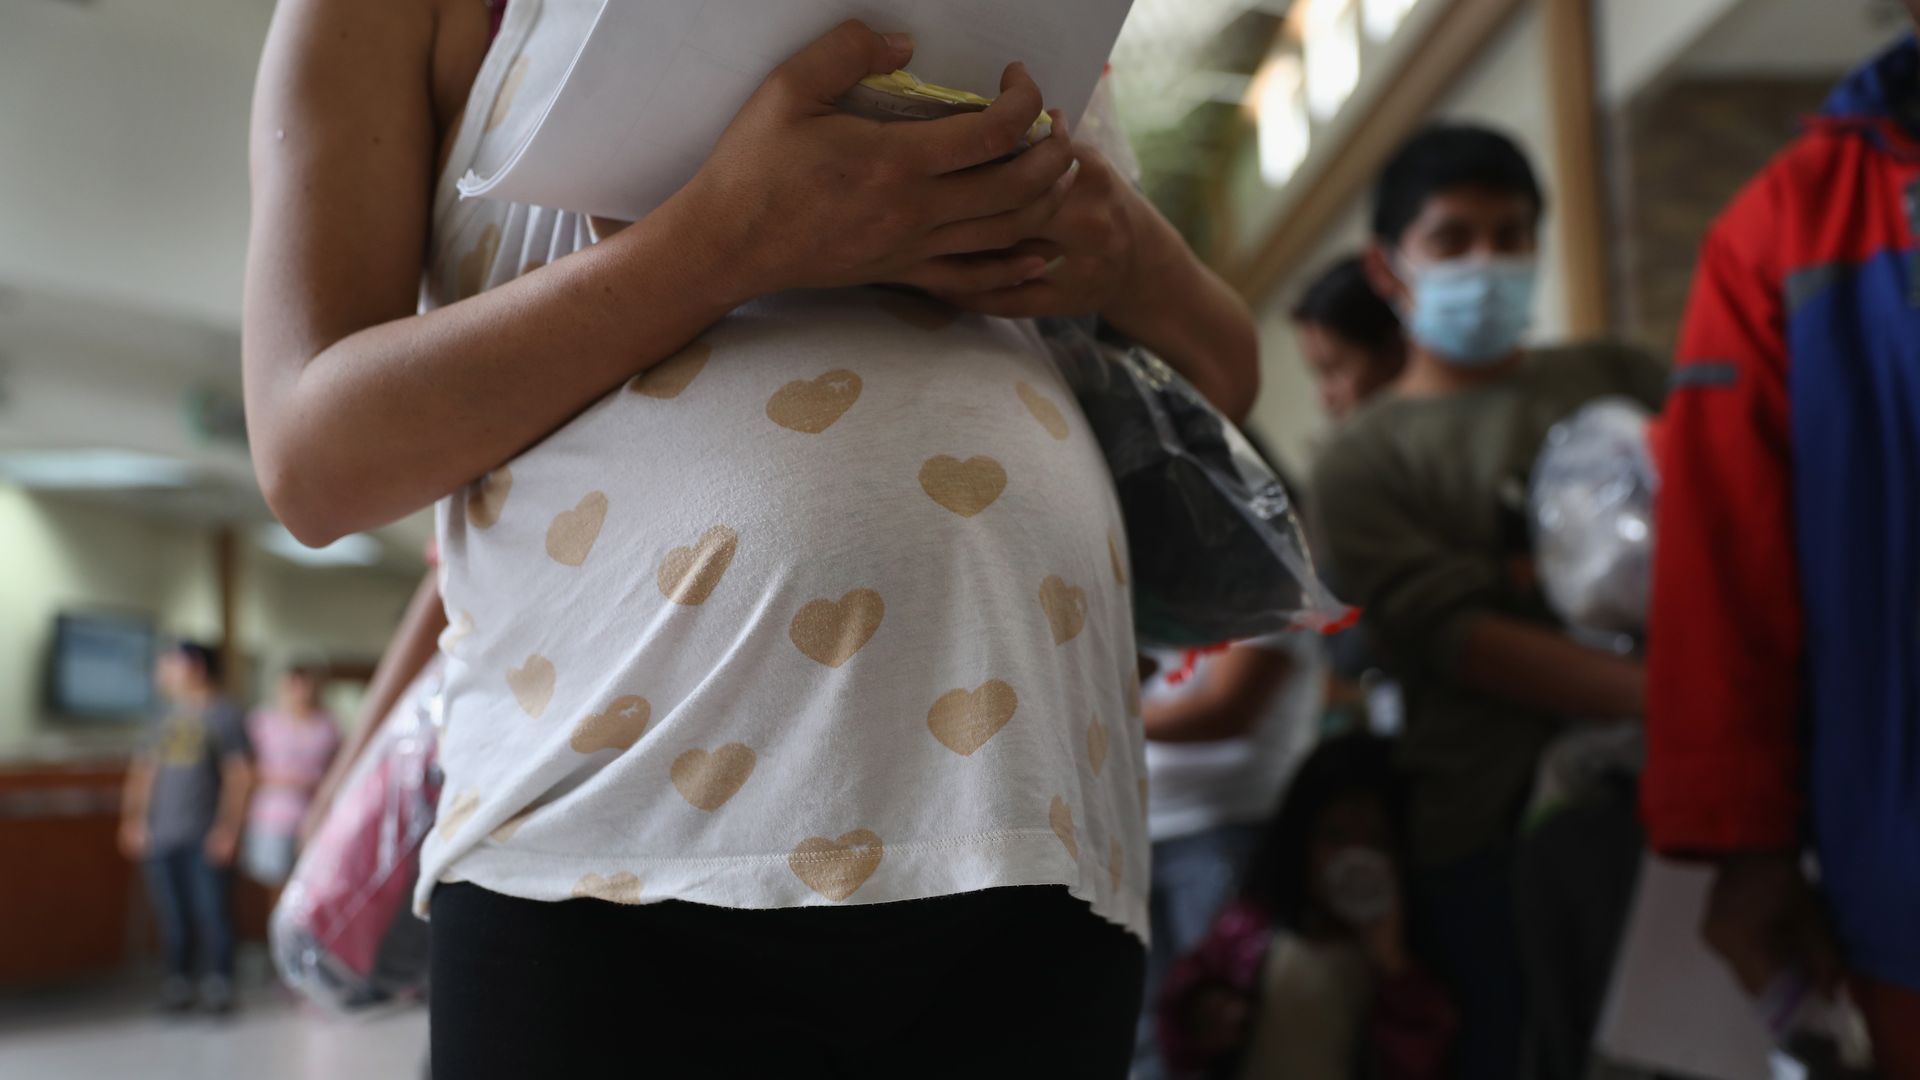 A pregnant woman holds papers and stands in line.